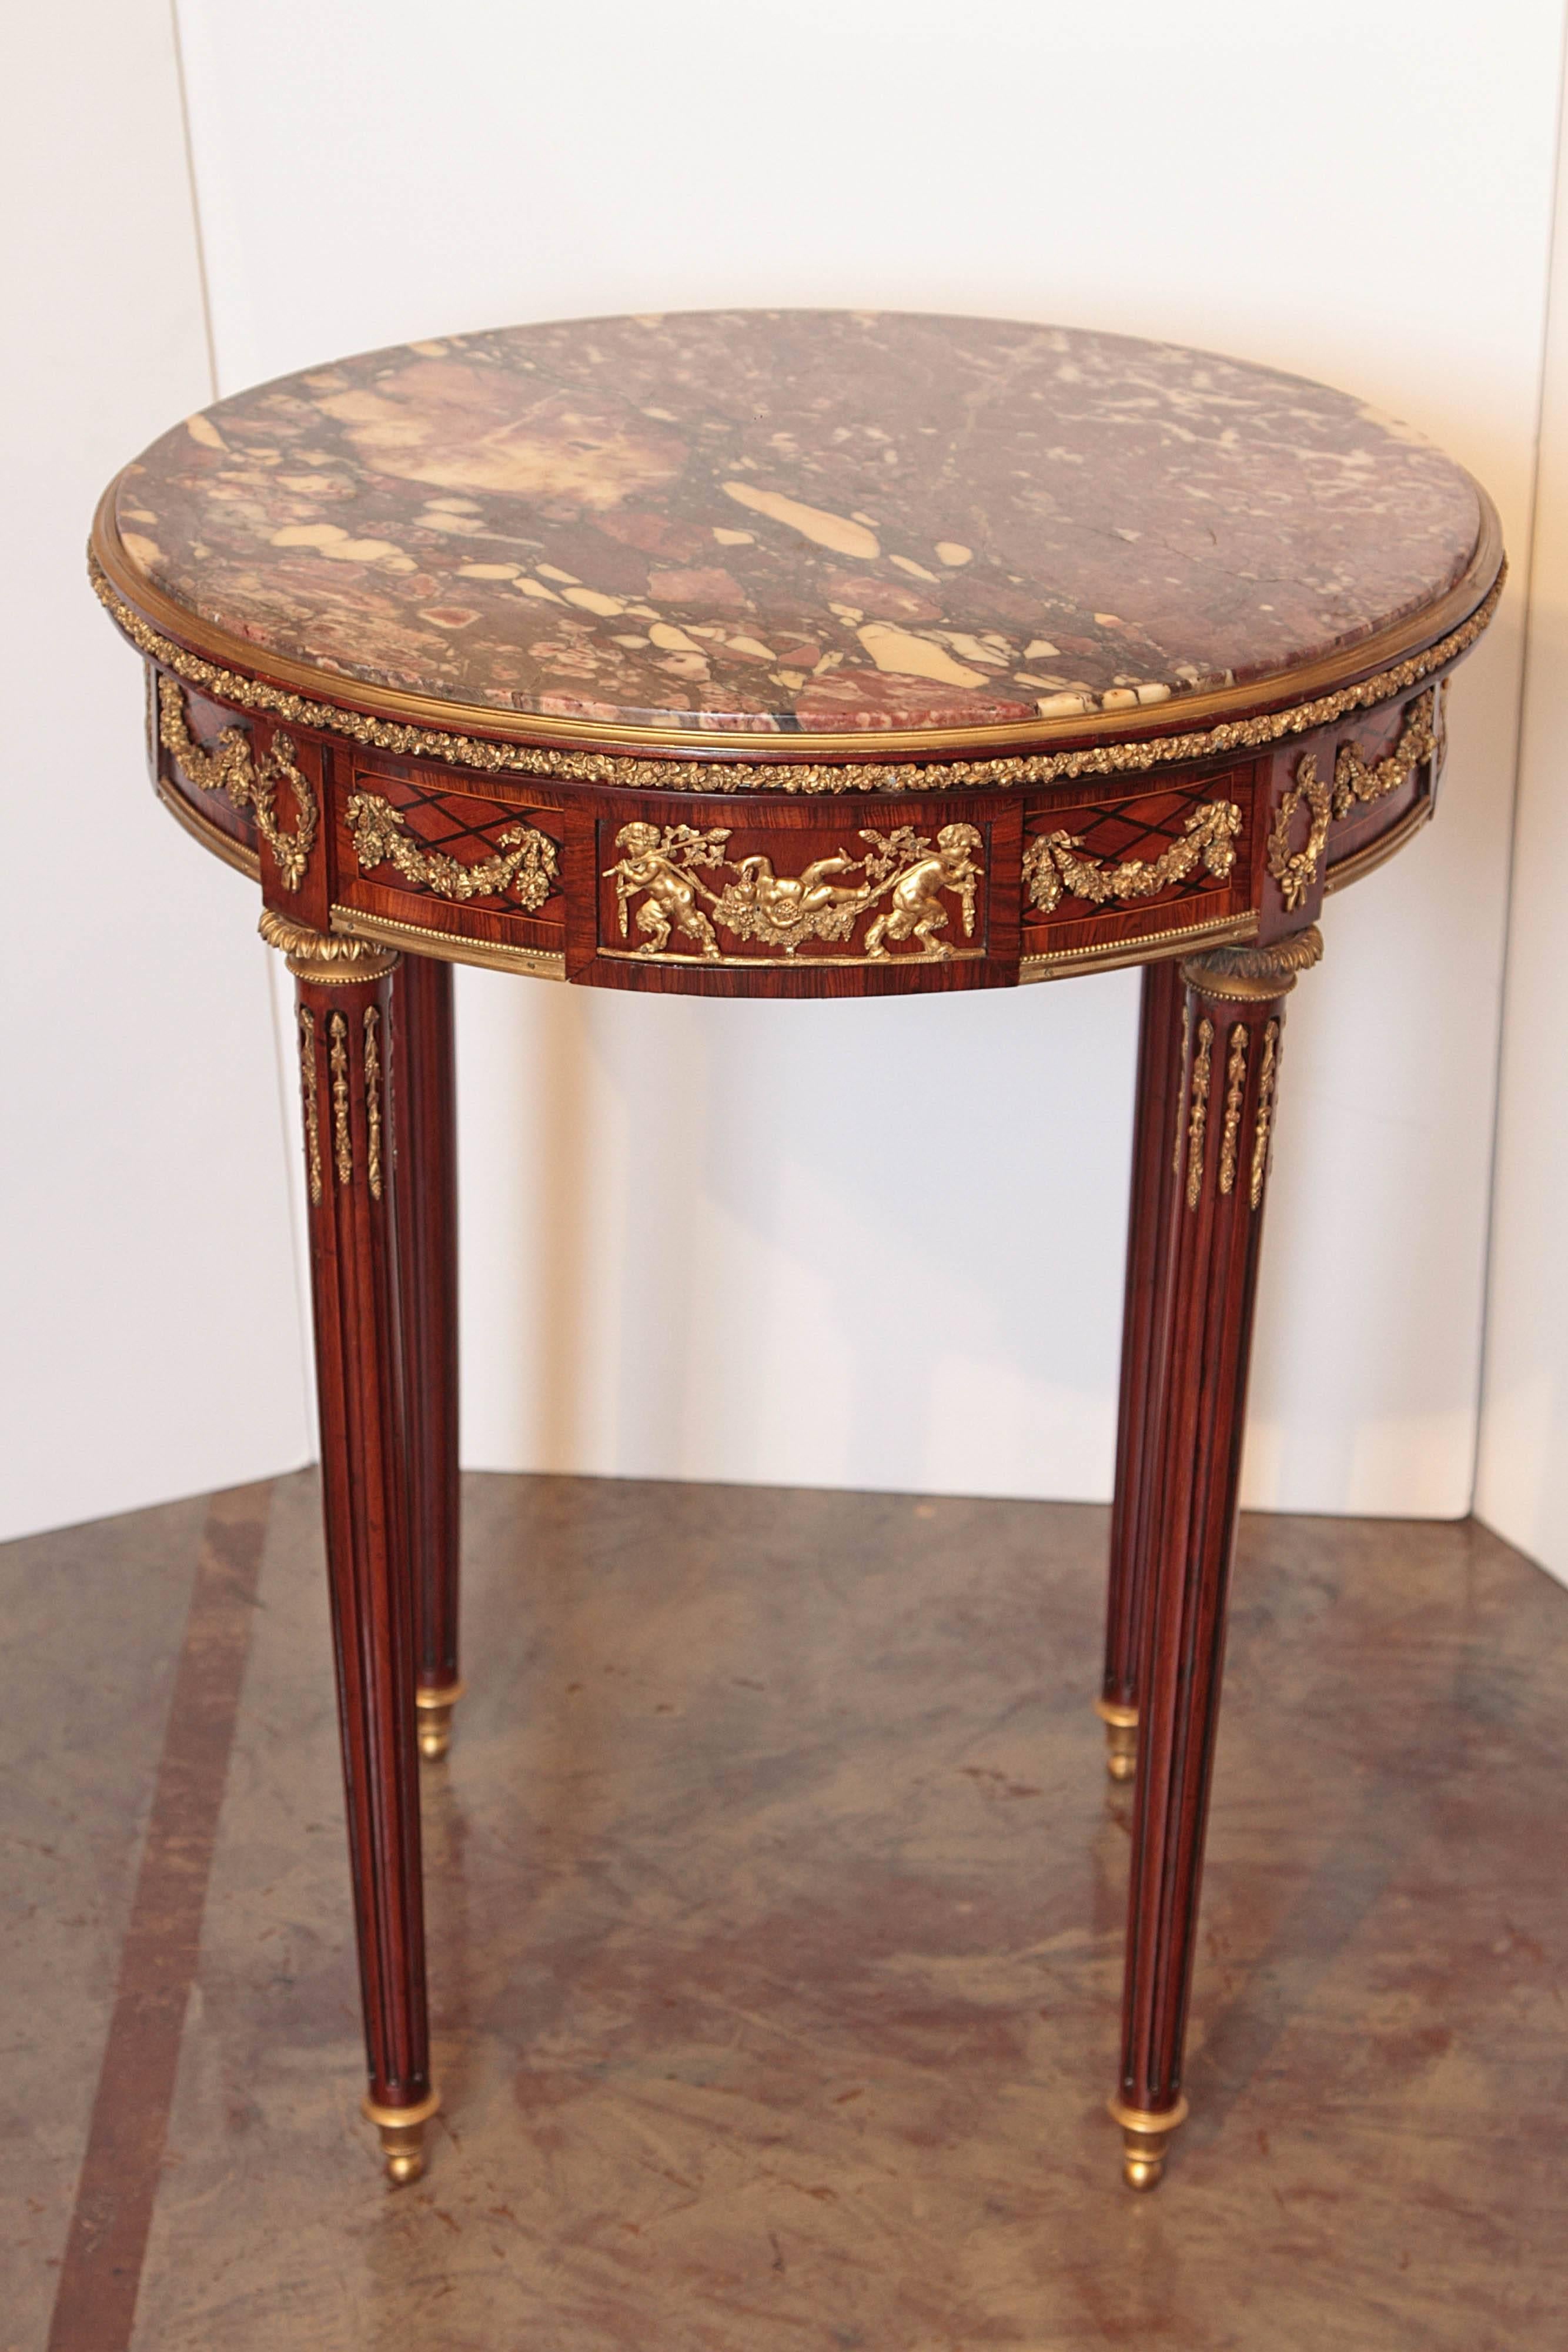 Louis XVI 19th Century French Mahogany and Gilt Bronze Marble Top Gueridon Table For Sale